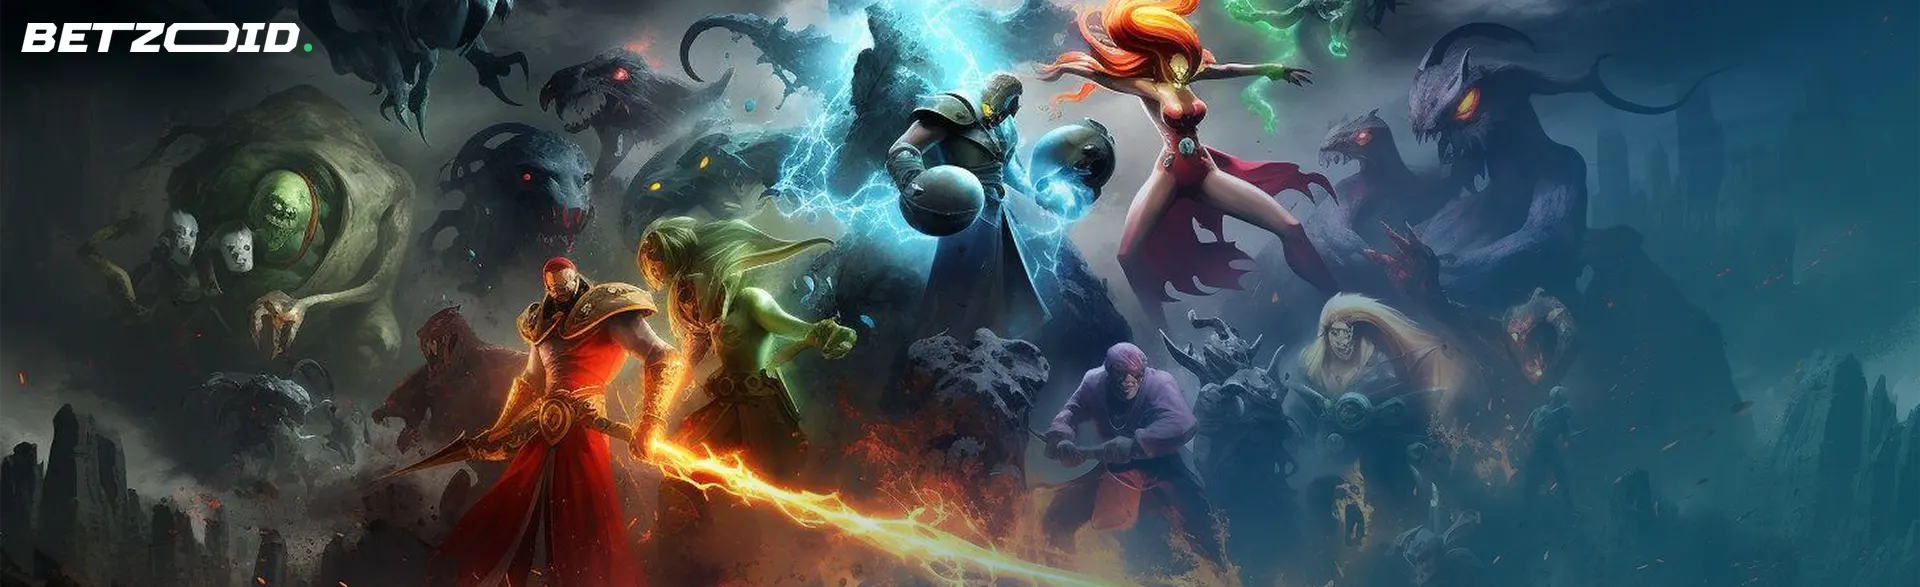 Dota 2 heroes in action for betting sites in Canada.